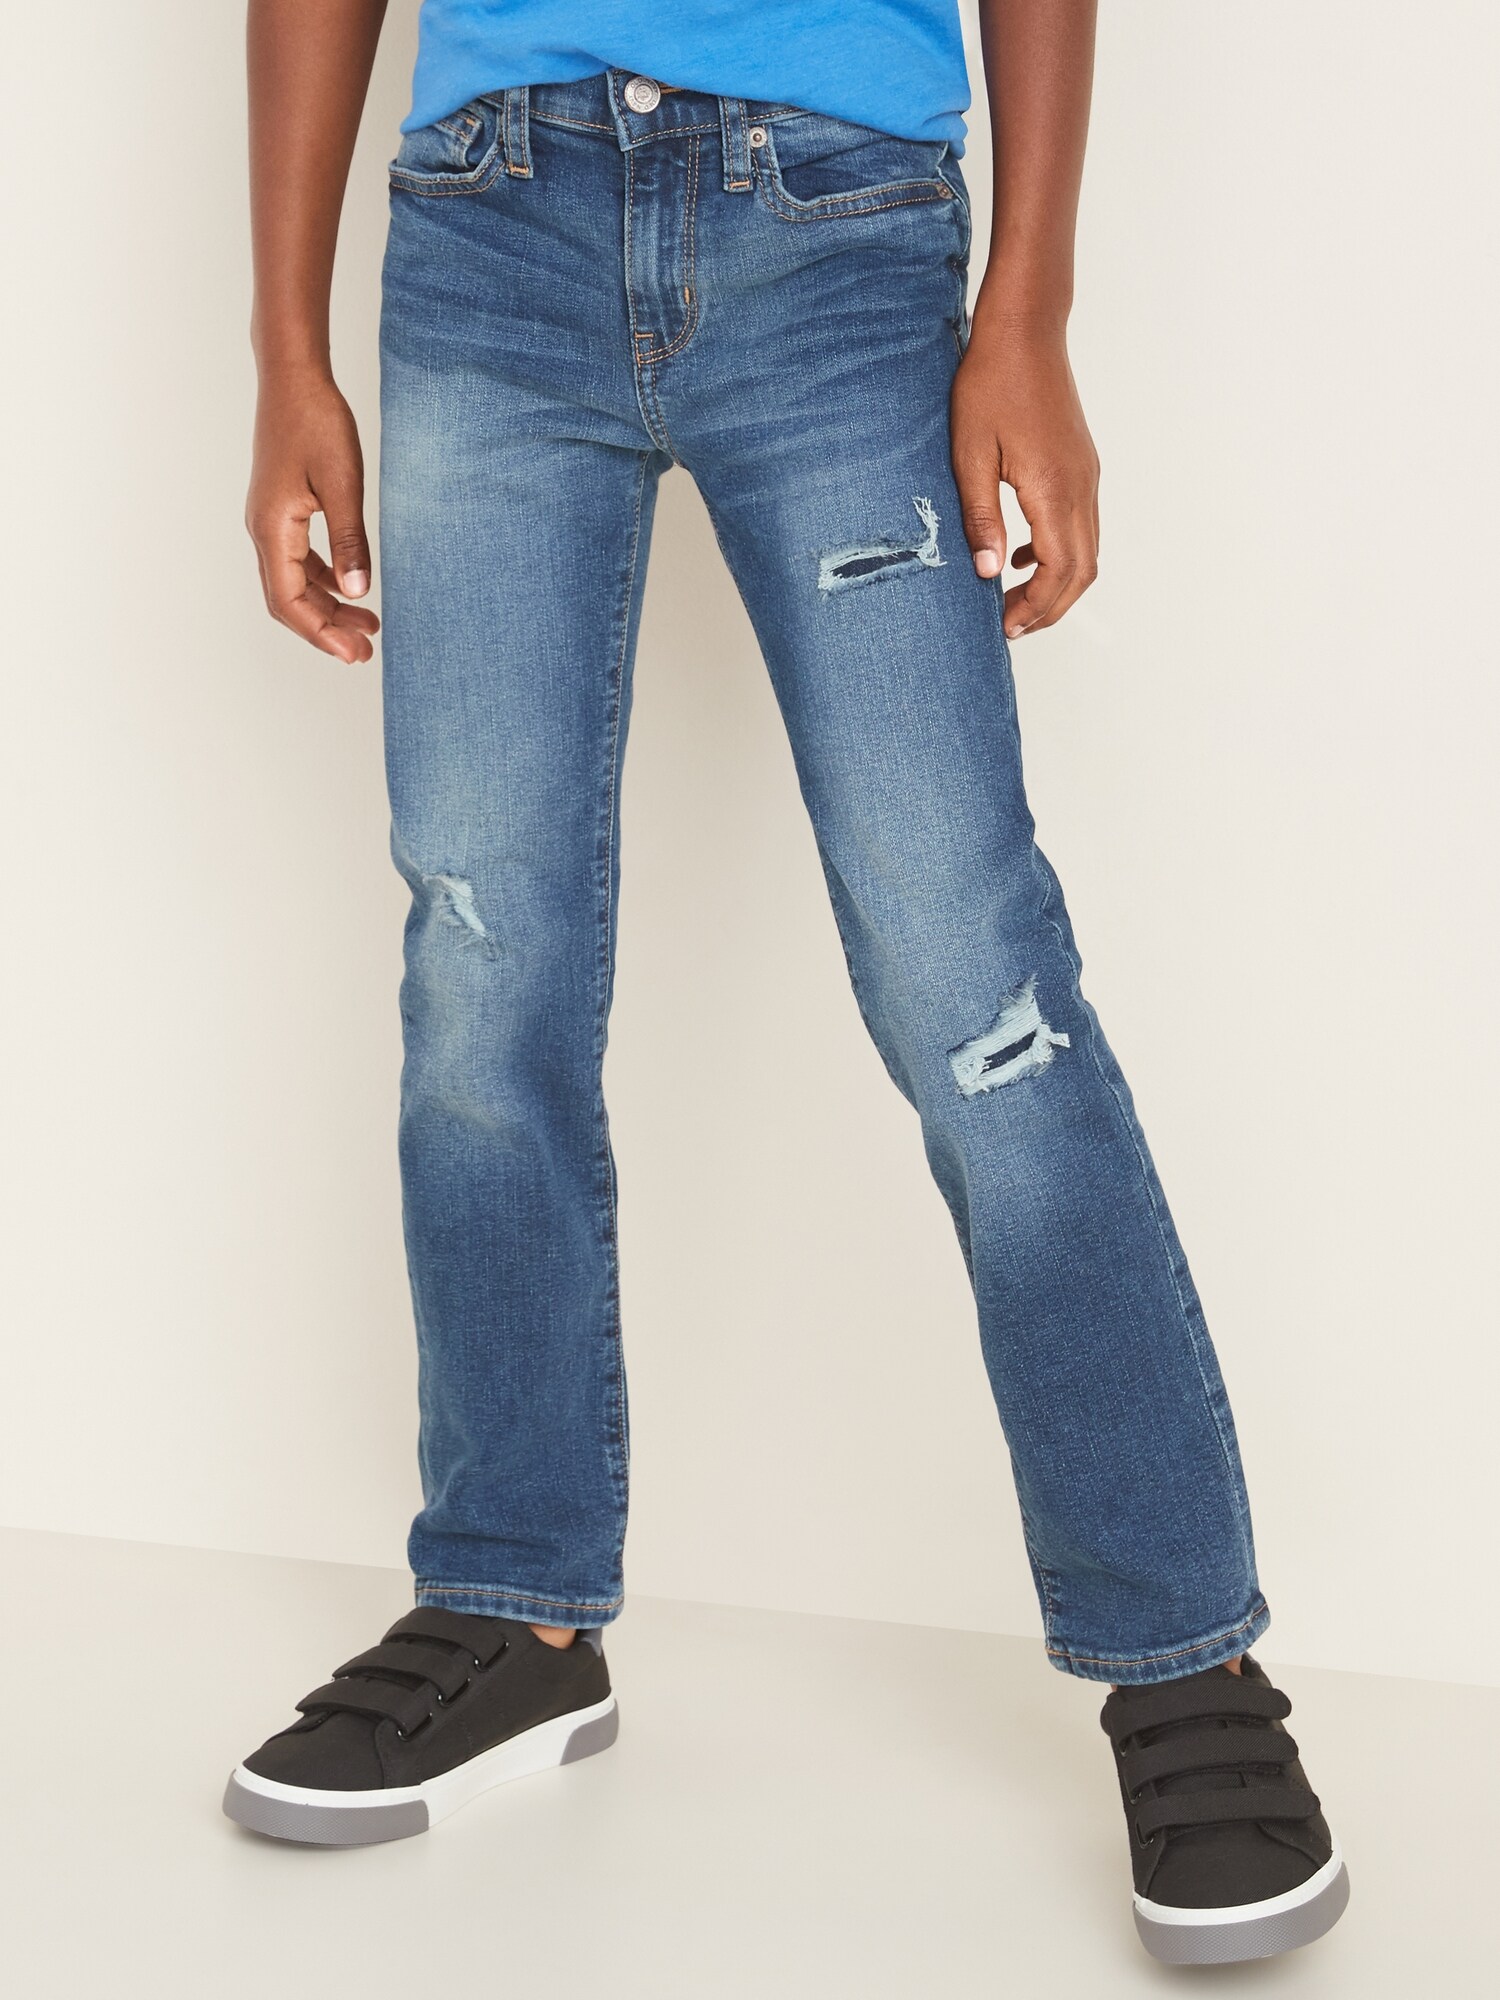 old navy built in tough jeans